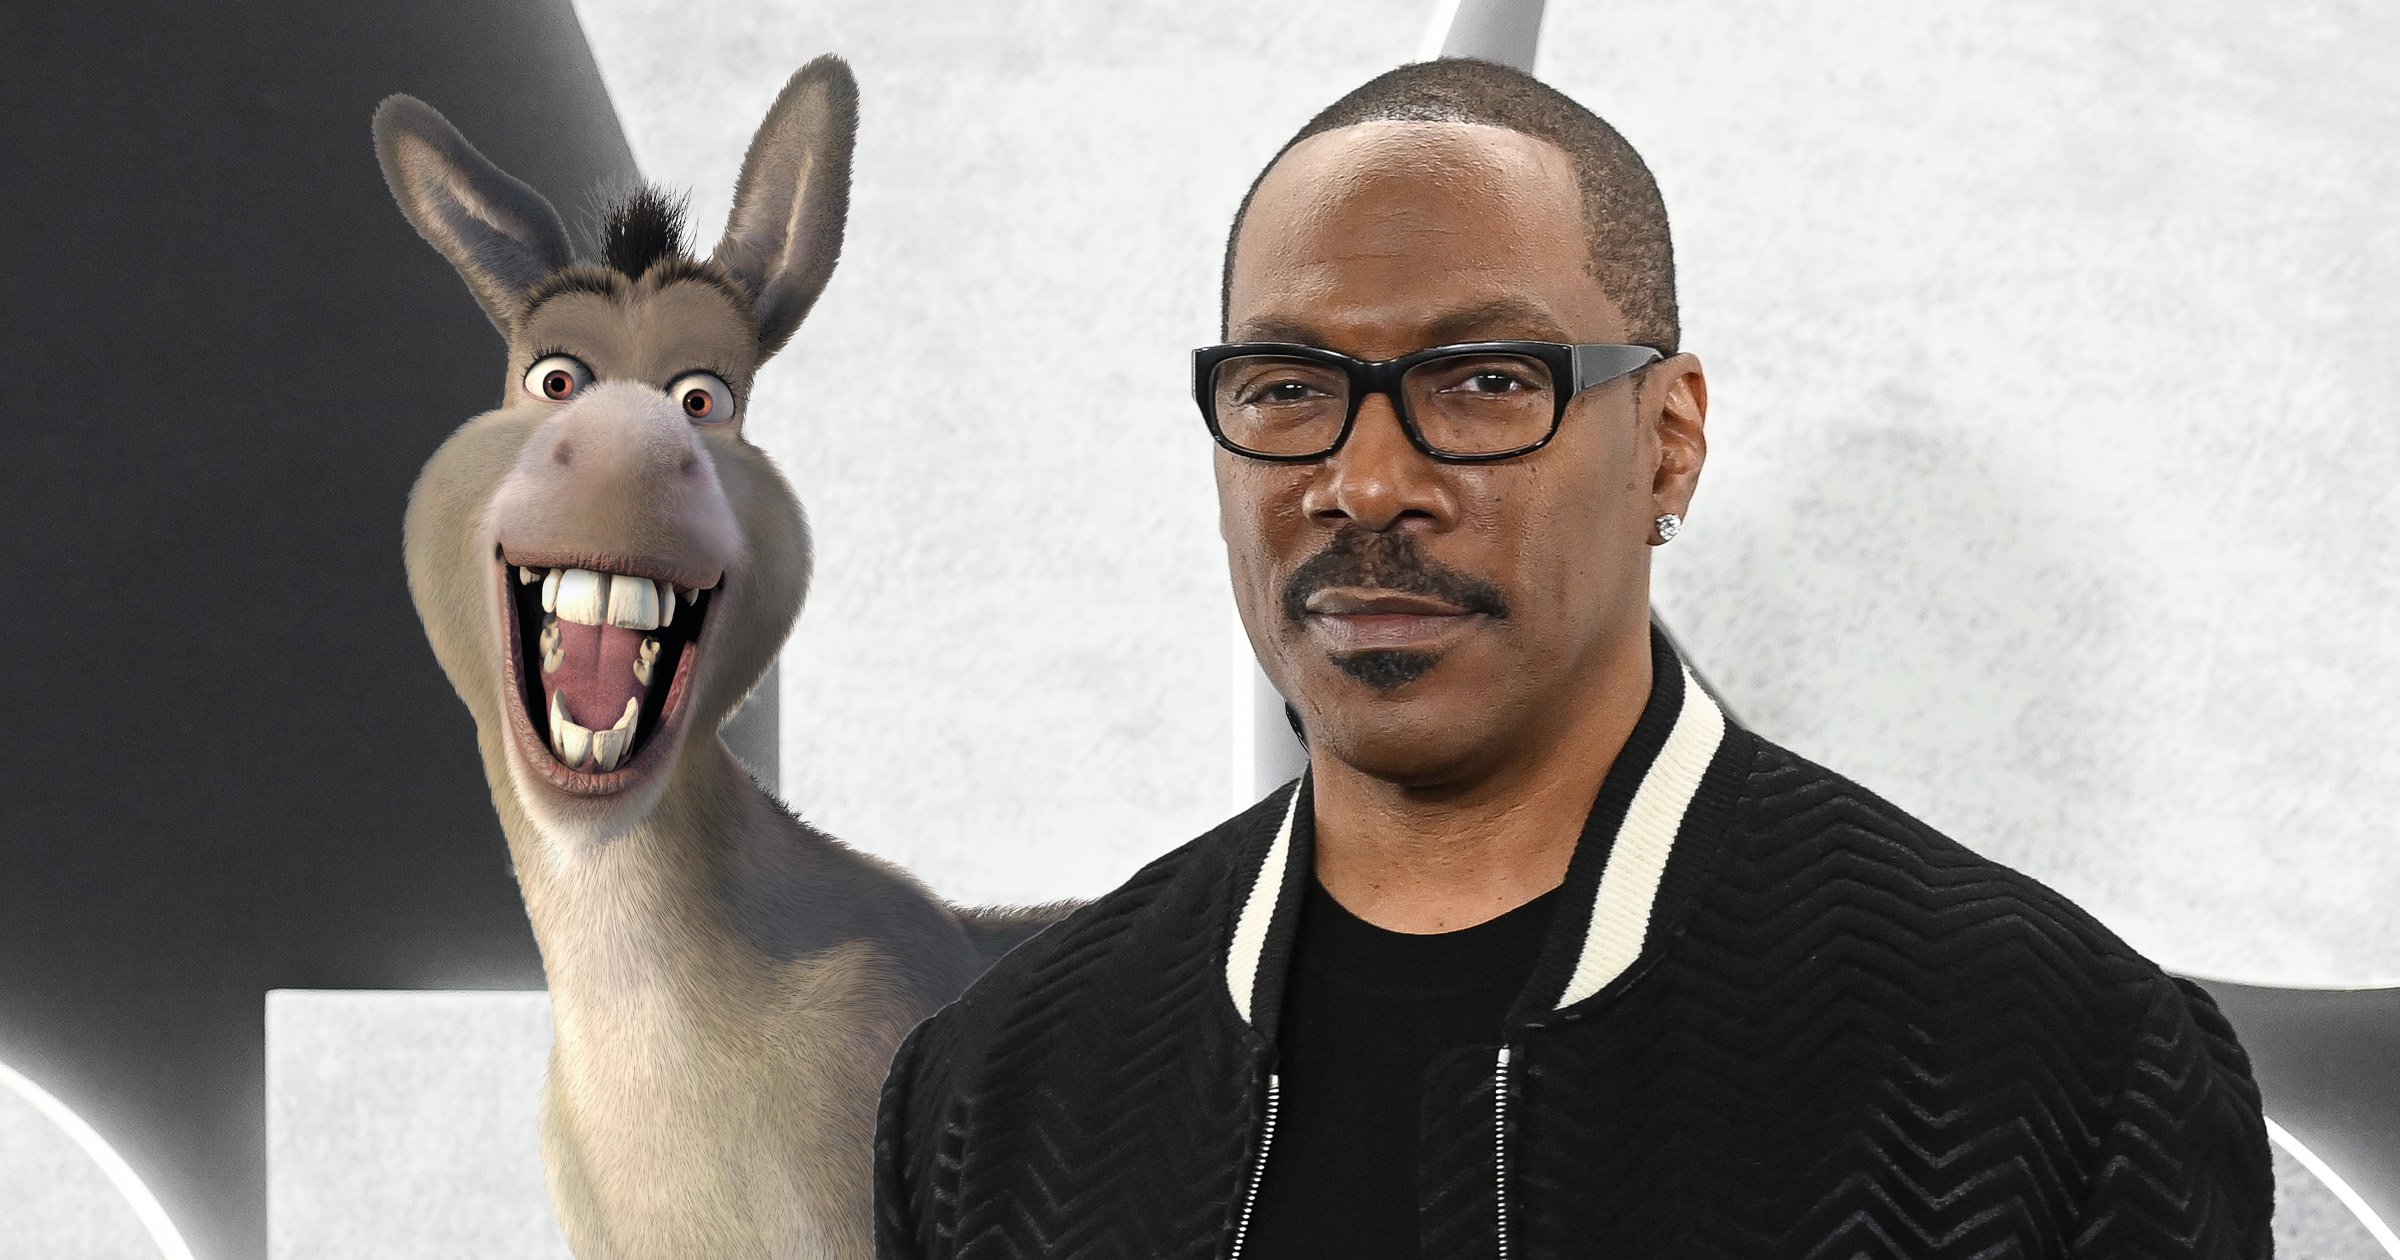 Eddie Murphy is totally ready to return to Shrek franchise as Donkey – and thinks he’s funnier than Puss in Boots